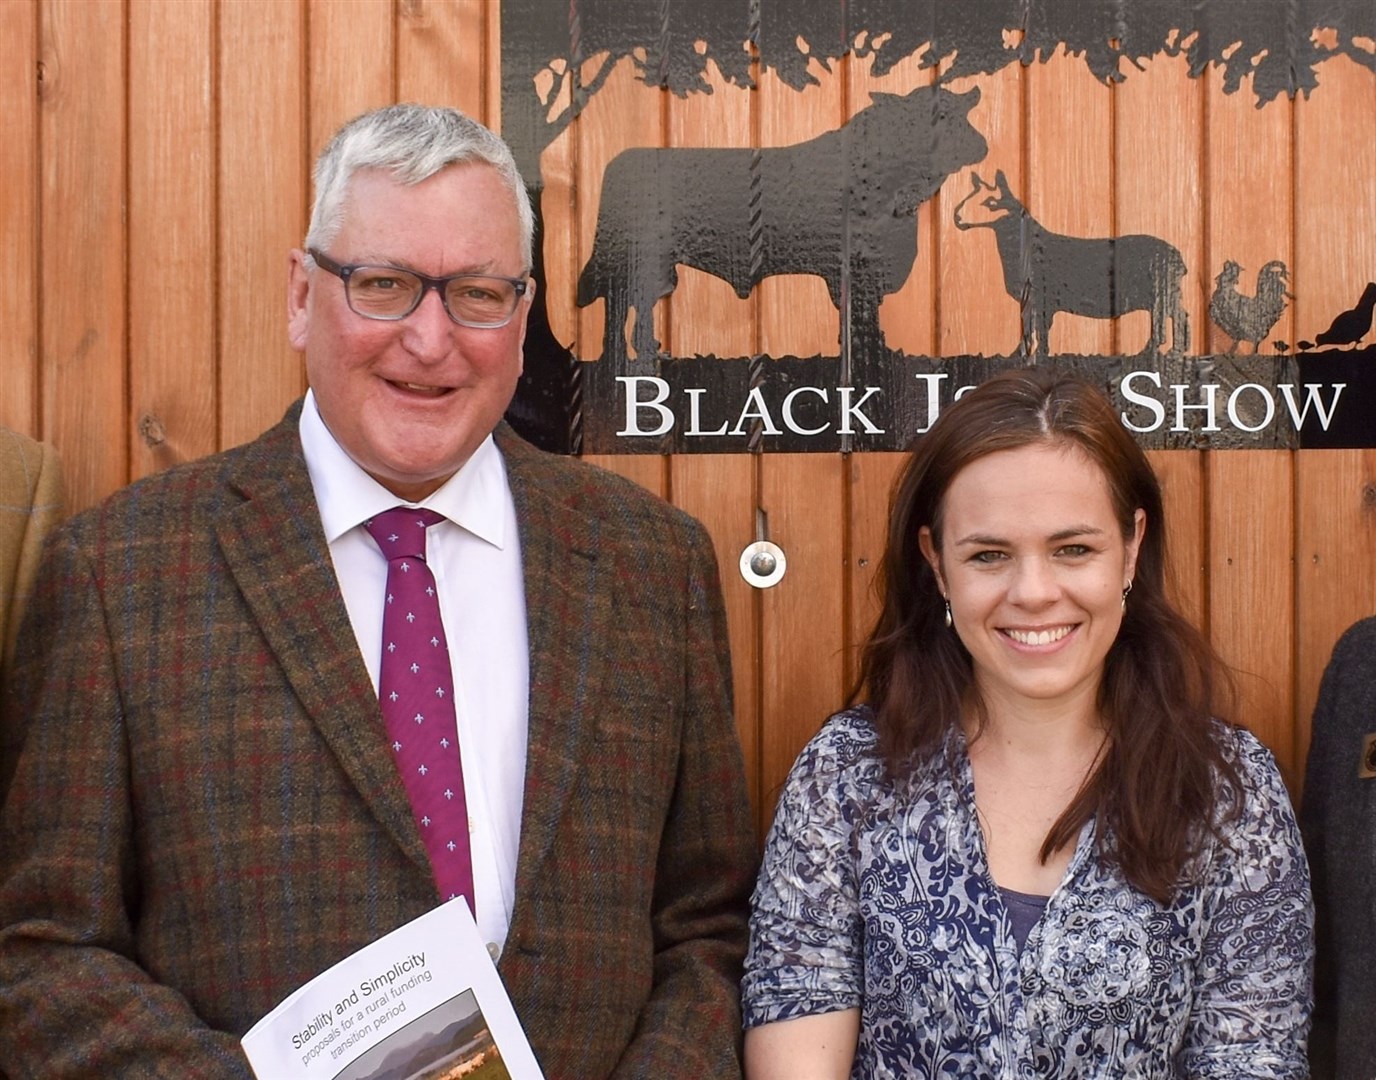 Highland MSPs Kate Forbes and Fergus Ewing pictured together at the Black Isle Show.